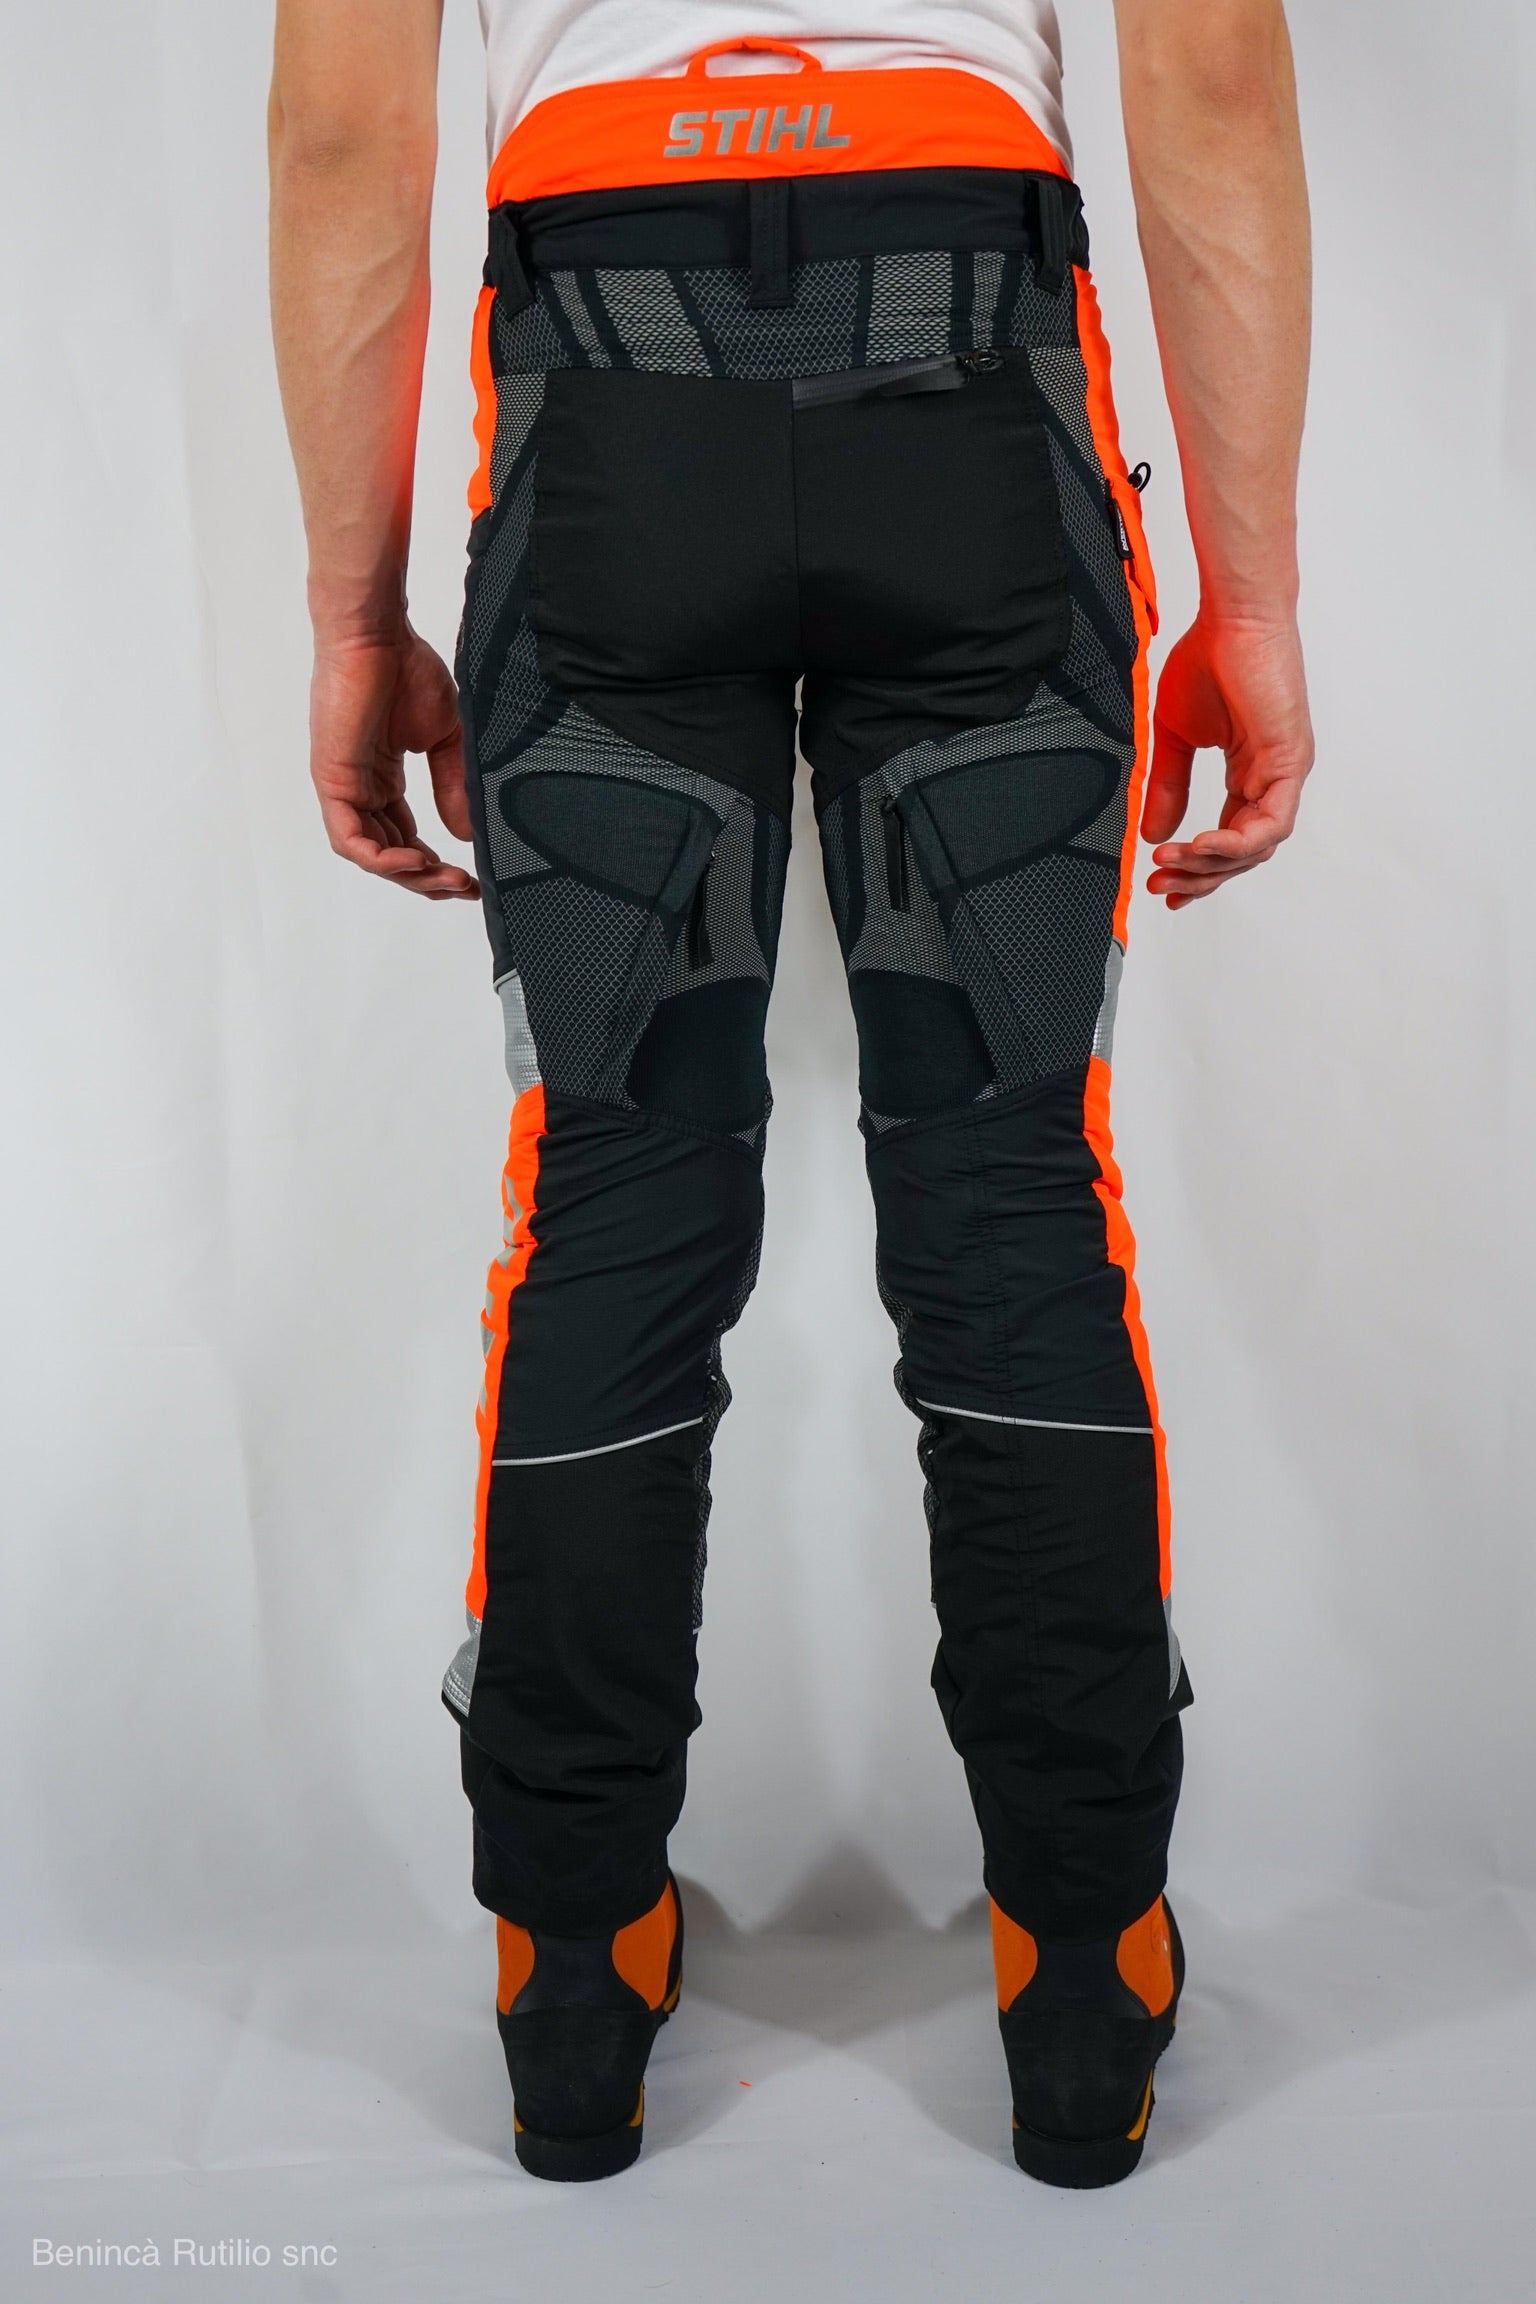 STIHL Raintec Wet Weather Trousers | Stay Dry | Gustharts